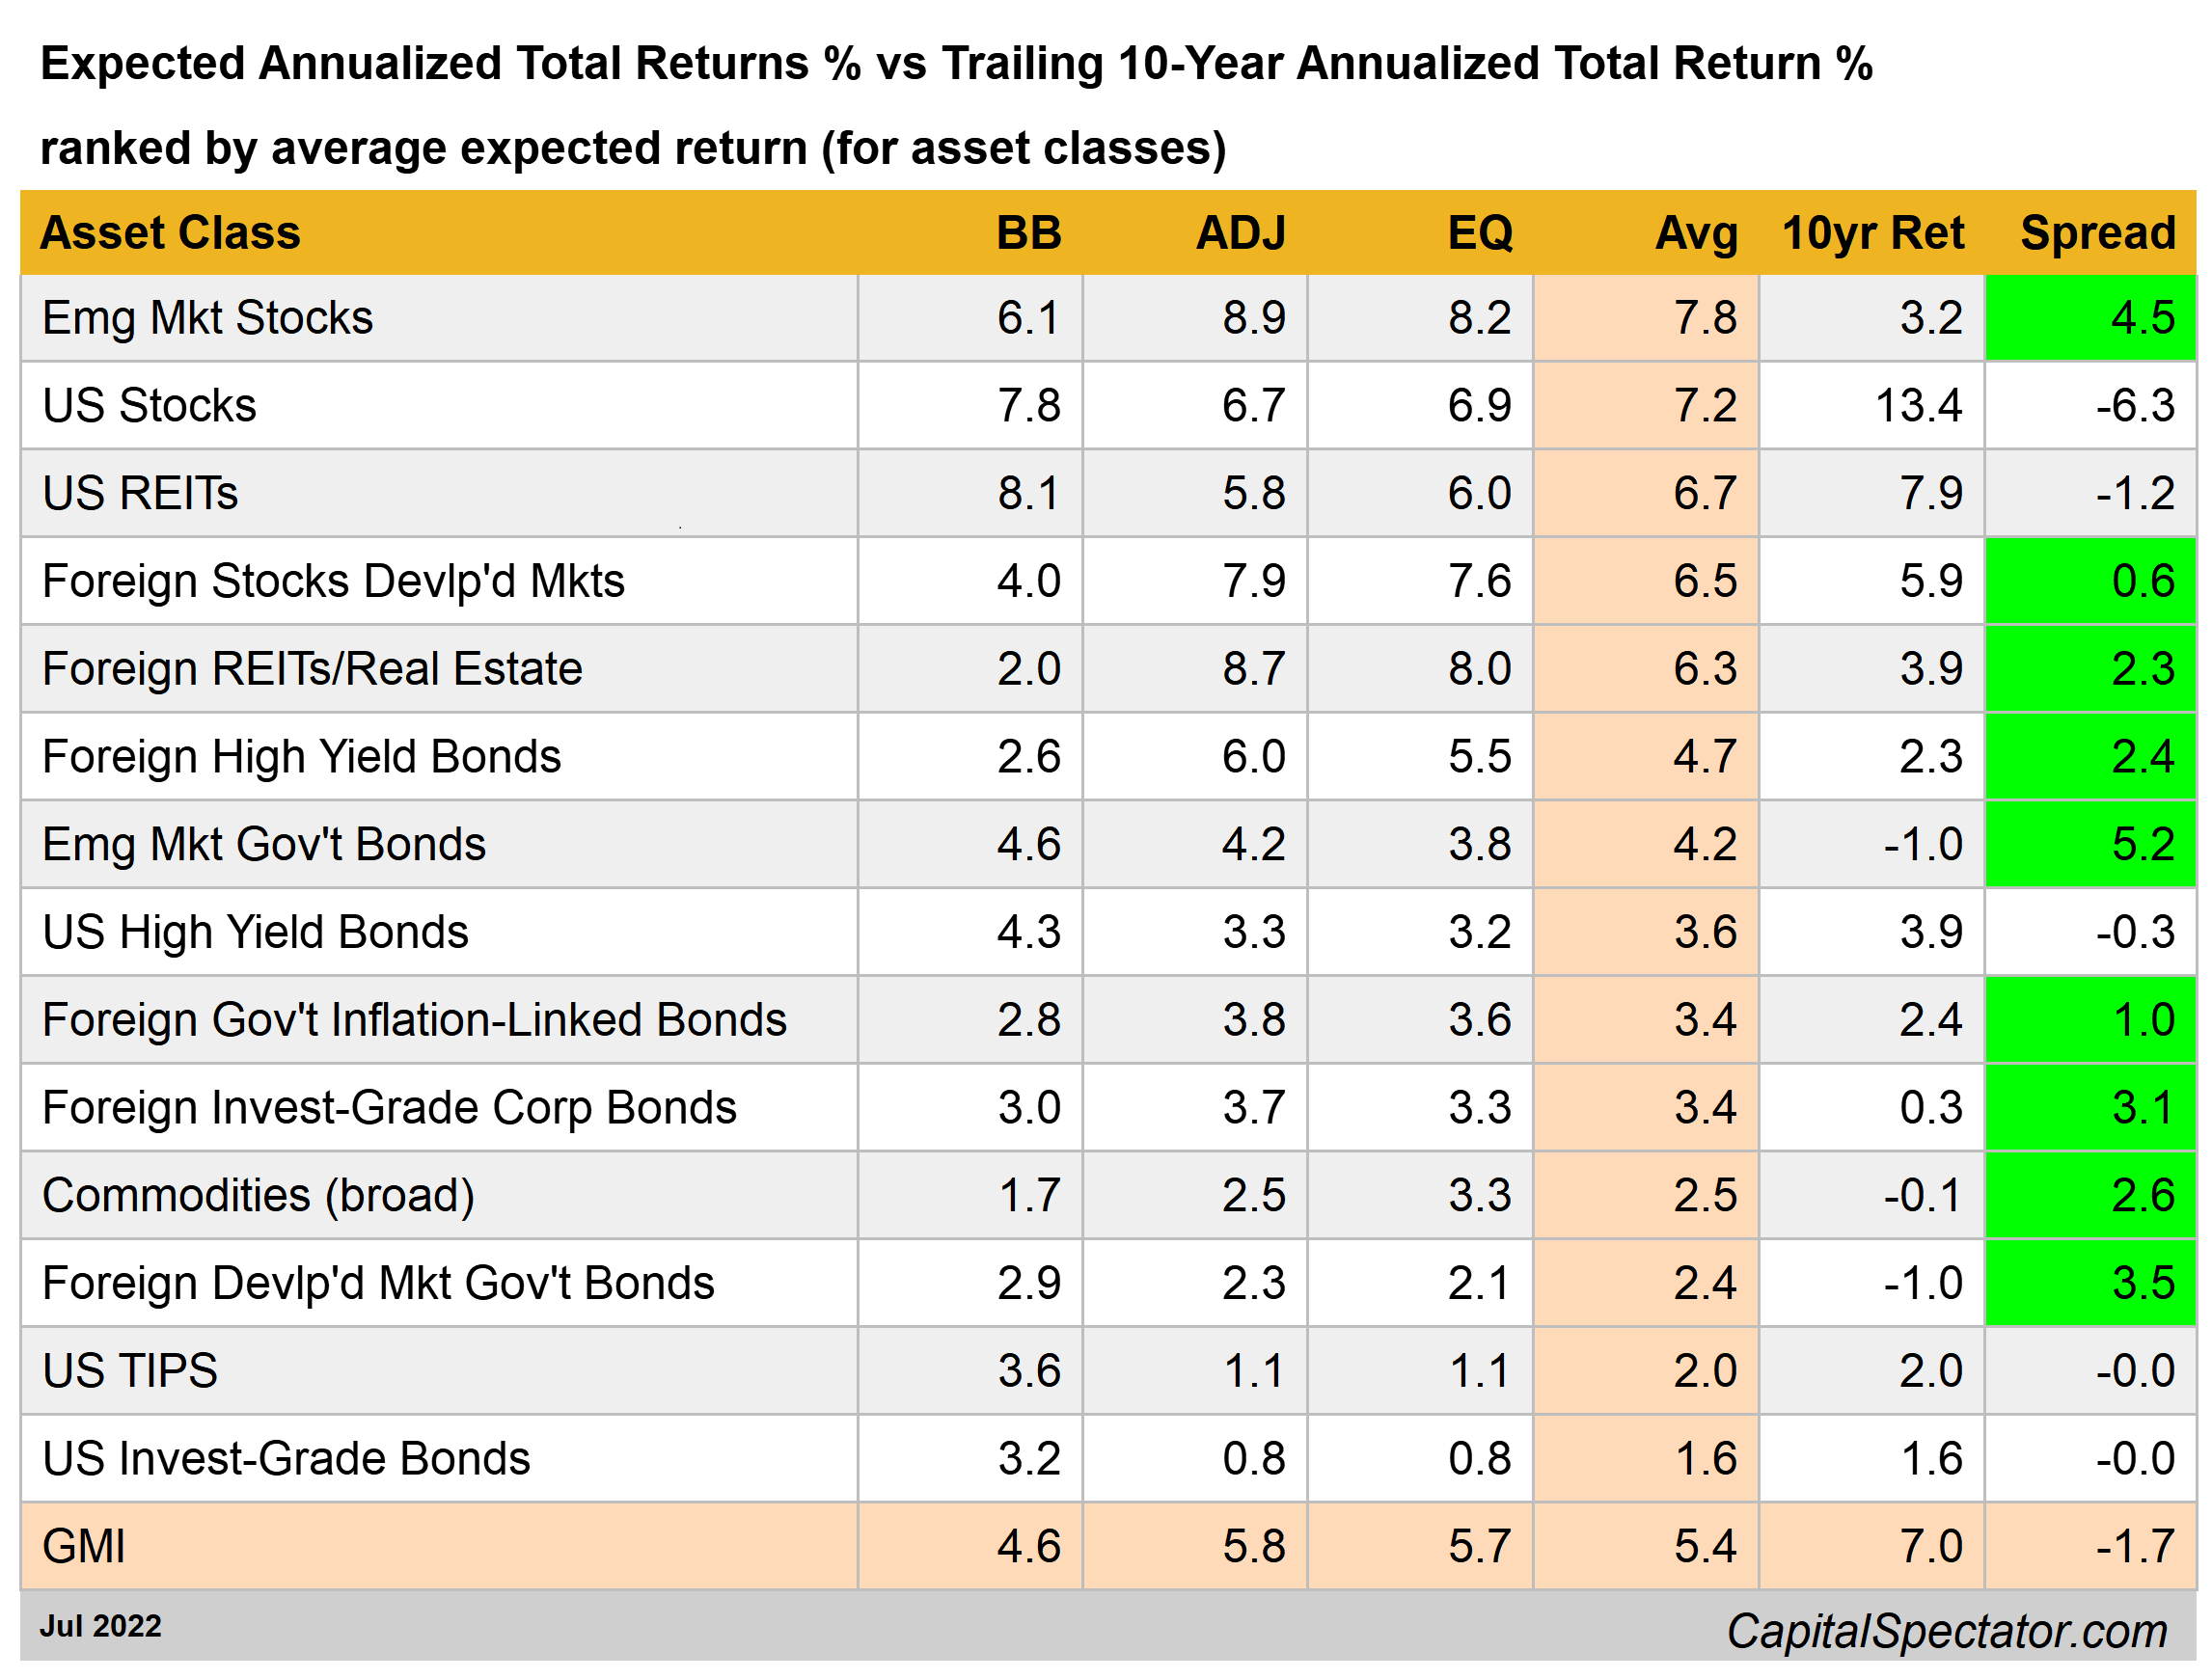 Expected vs Trailing 10-Yr Annualized Total Returns